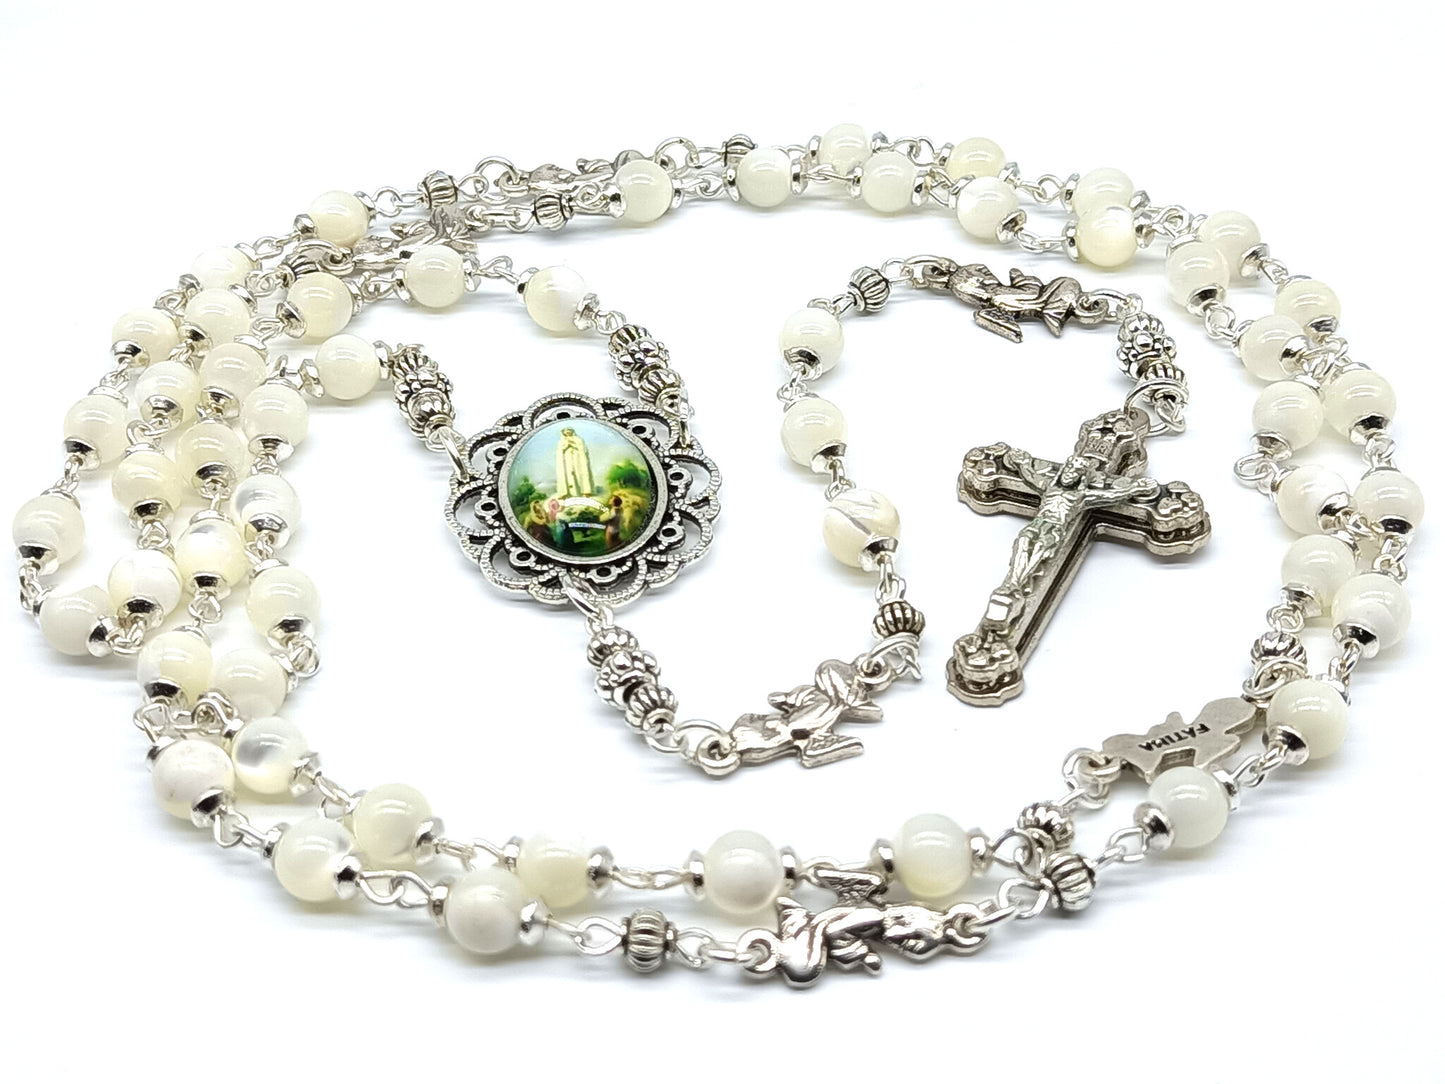 Mother of Pearl Fatima unique rosary beads with silver angel pater beads, crucifix and picture centre medal.